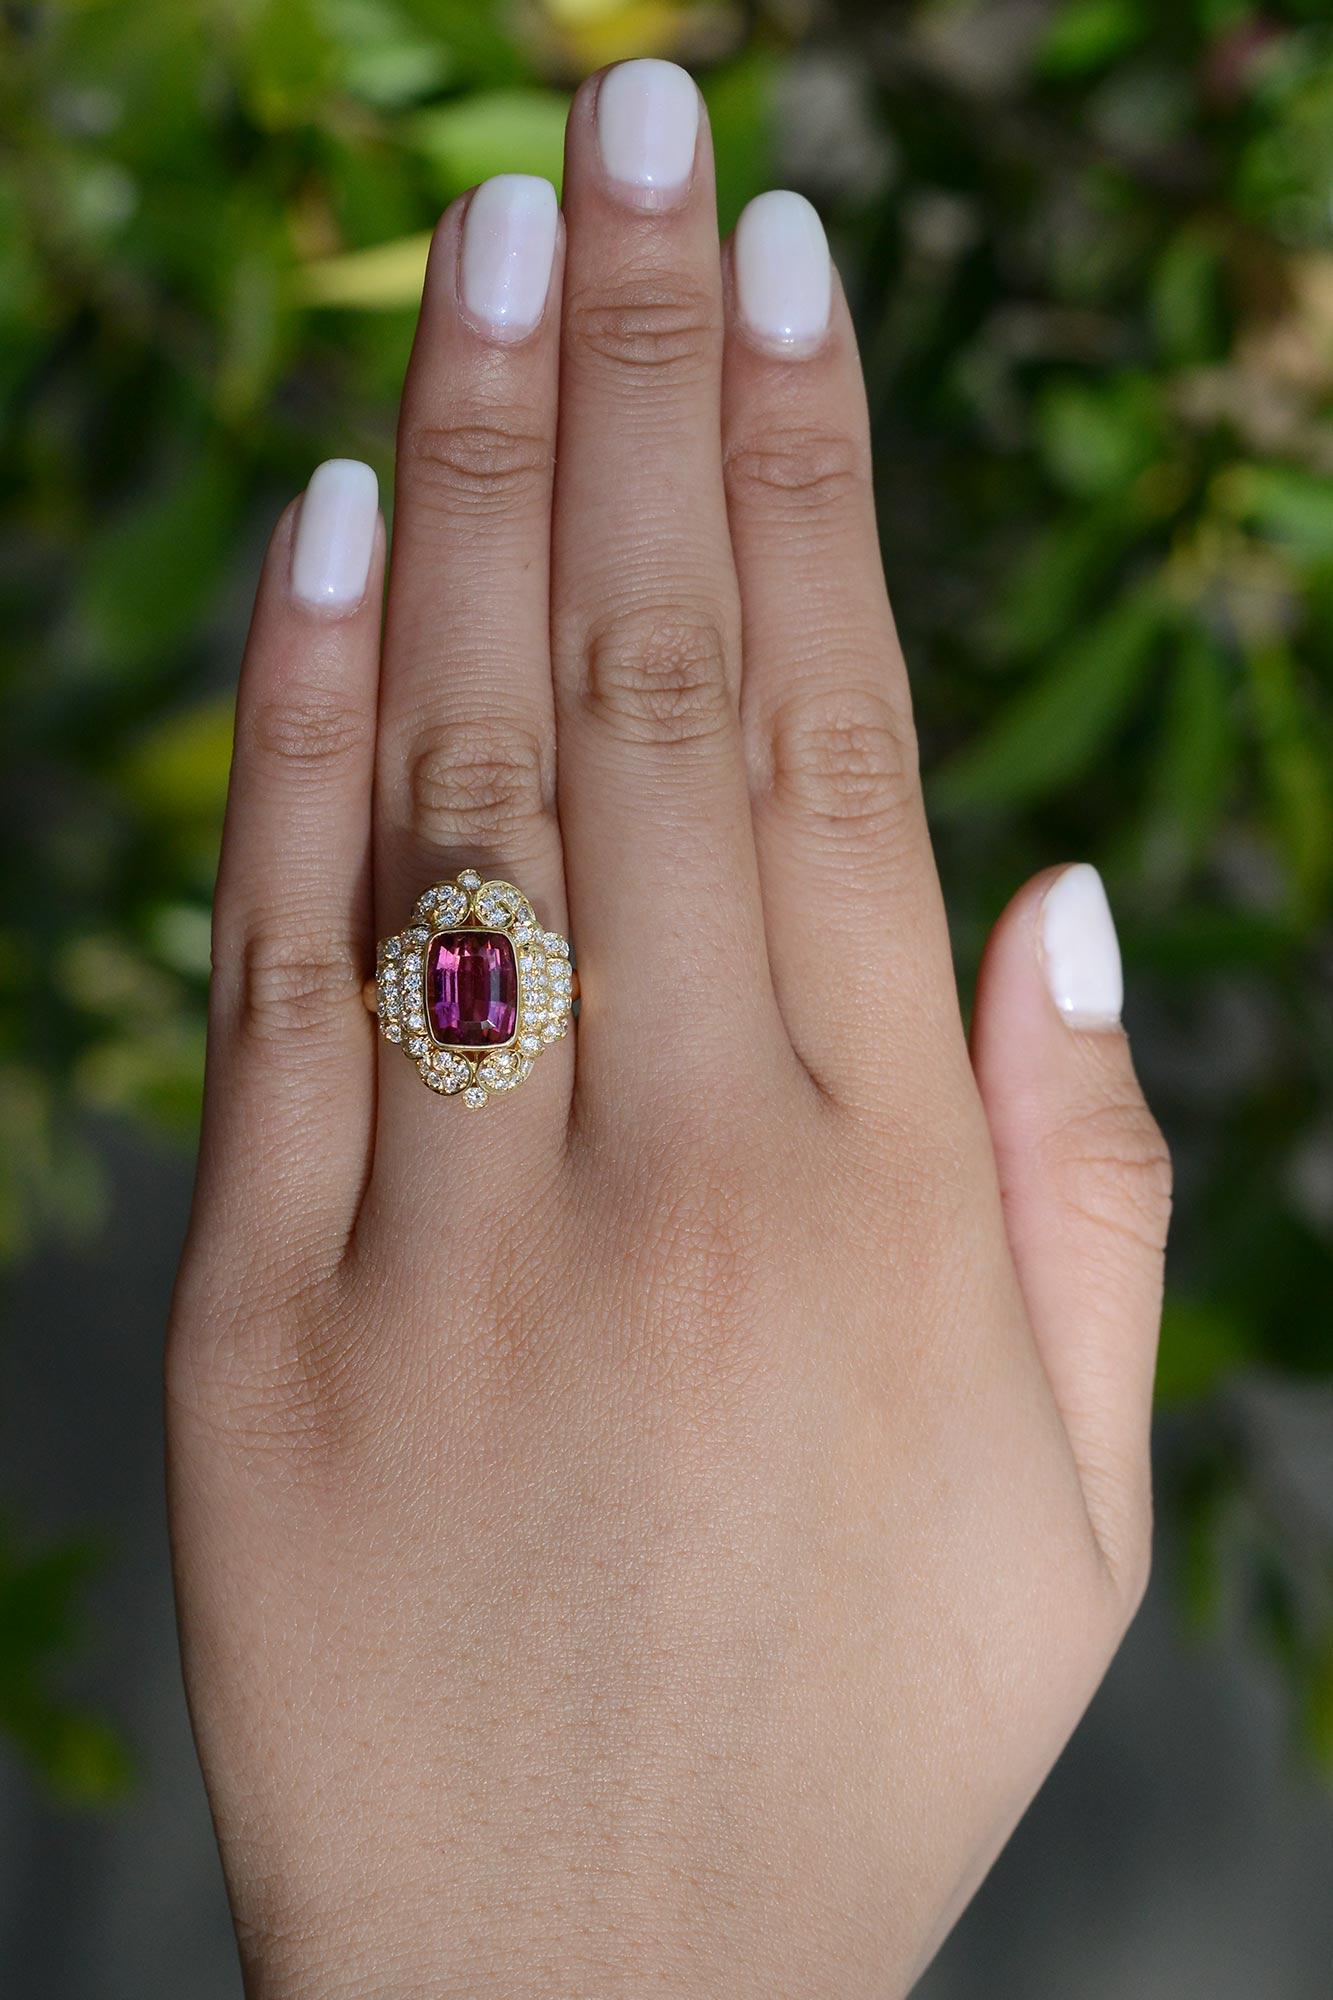 The blend of the rich 18k yellow gold, glimmering diamonds, and enthralling pink tourmaline make for a ravishing ring. The rubellite tourmaline has extraordinary color, a bright pink with gleams of orange showcased in a bezel setting. The diamonds